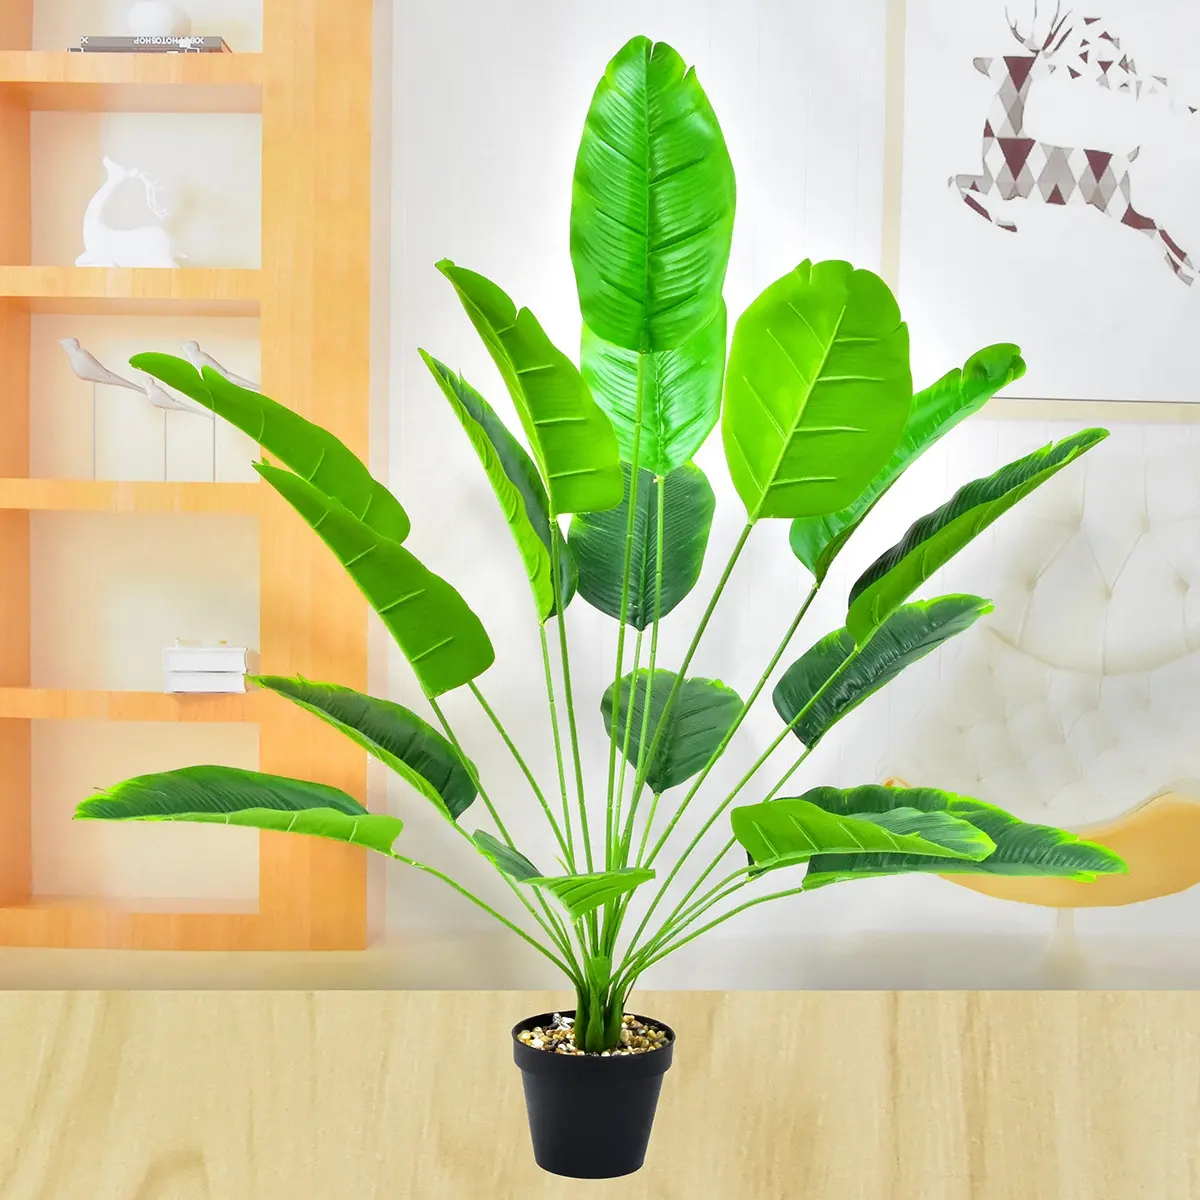 Artificial greenery potted traveler's banana leaves decorative plant